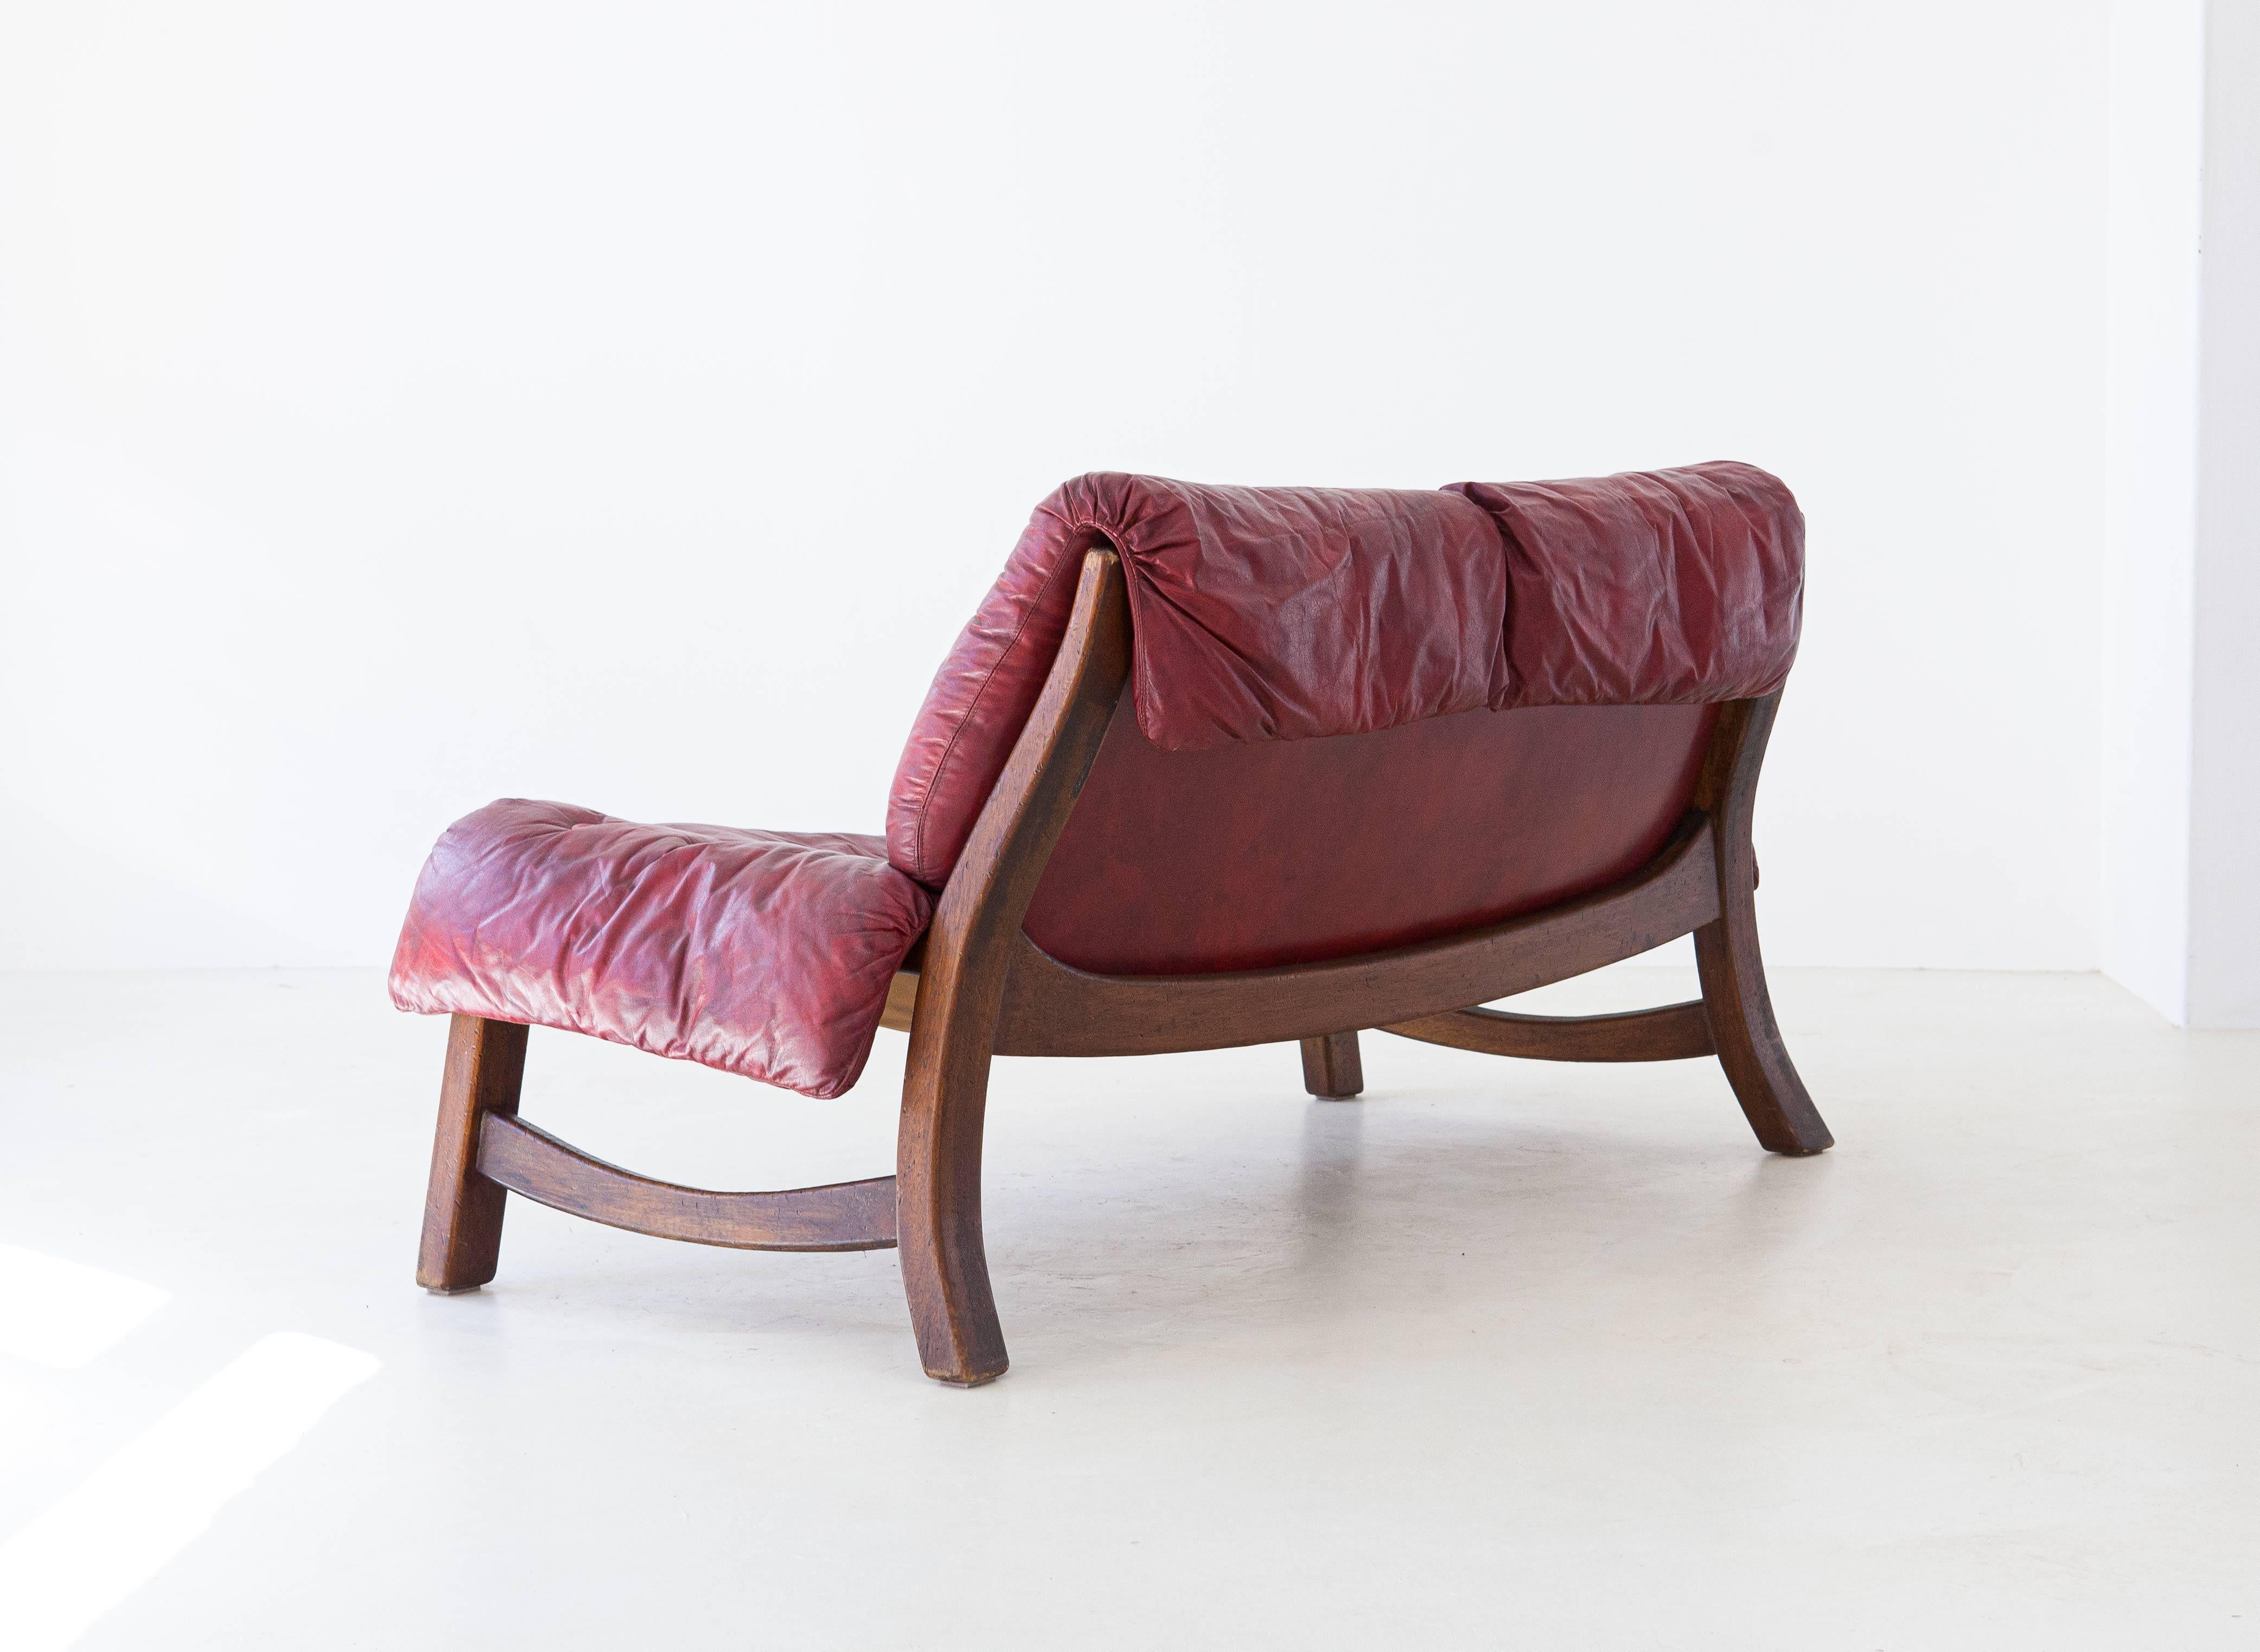 1960s Italian Bordeaux Leather with Wooden Frame Sofa 2